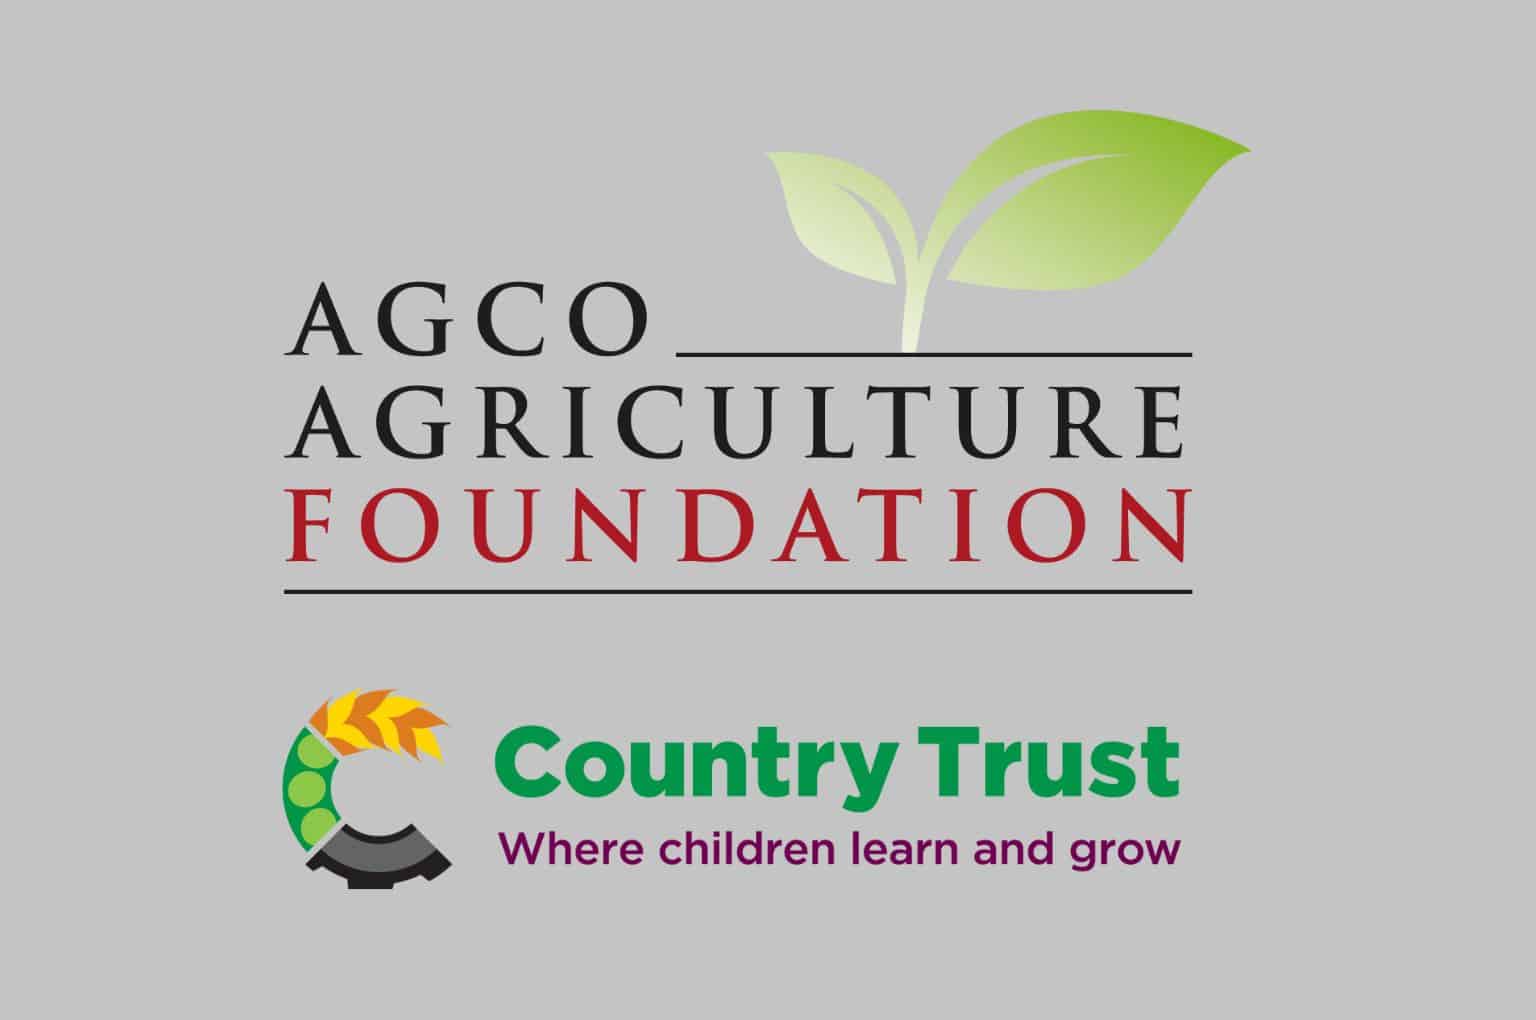 AGCO Agriculture Foundation donates to The Country Trust